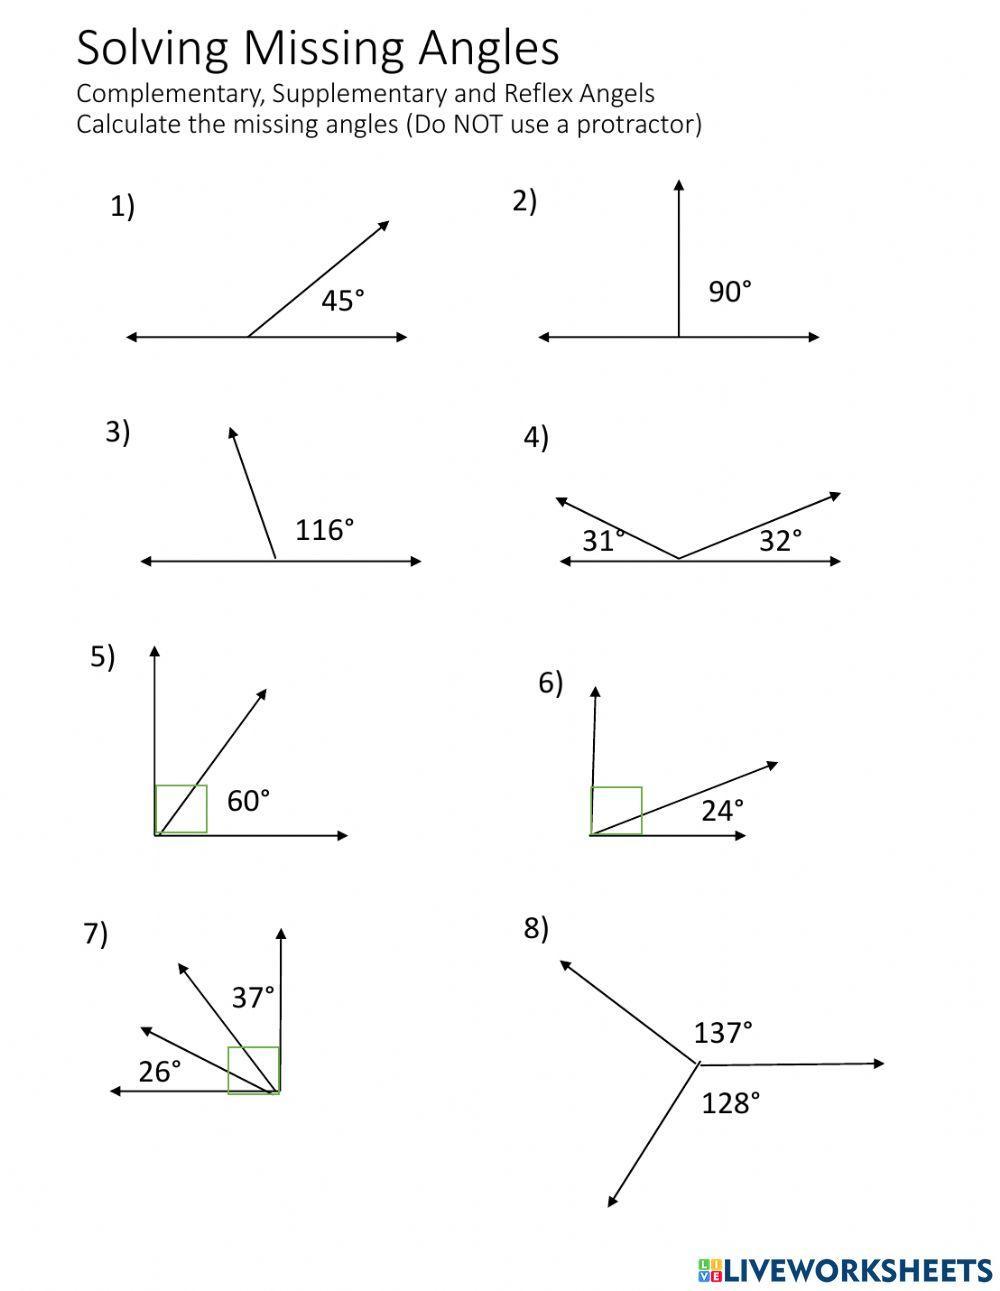 Solving Missing Angles